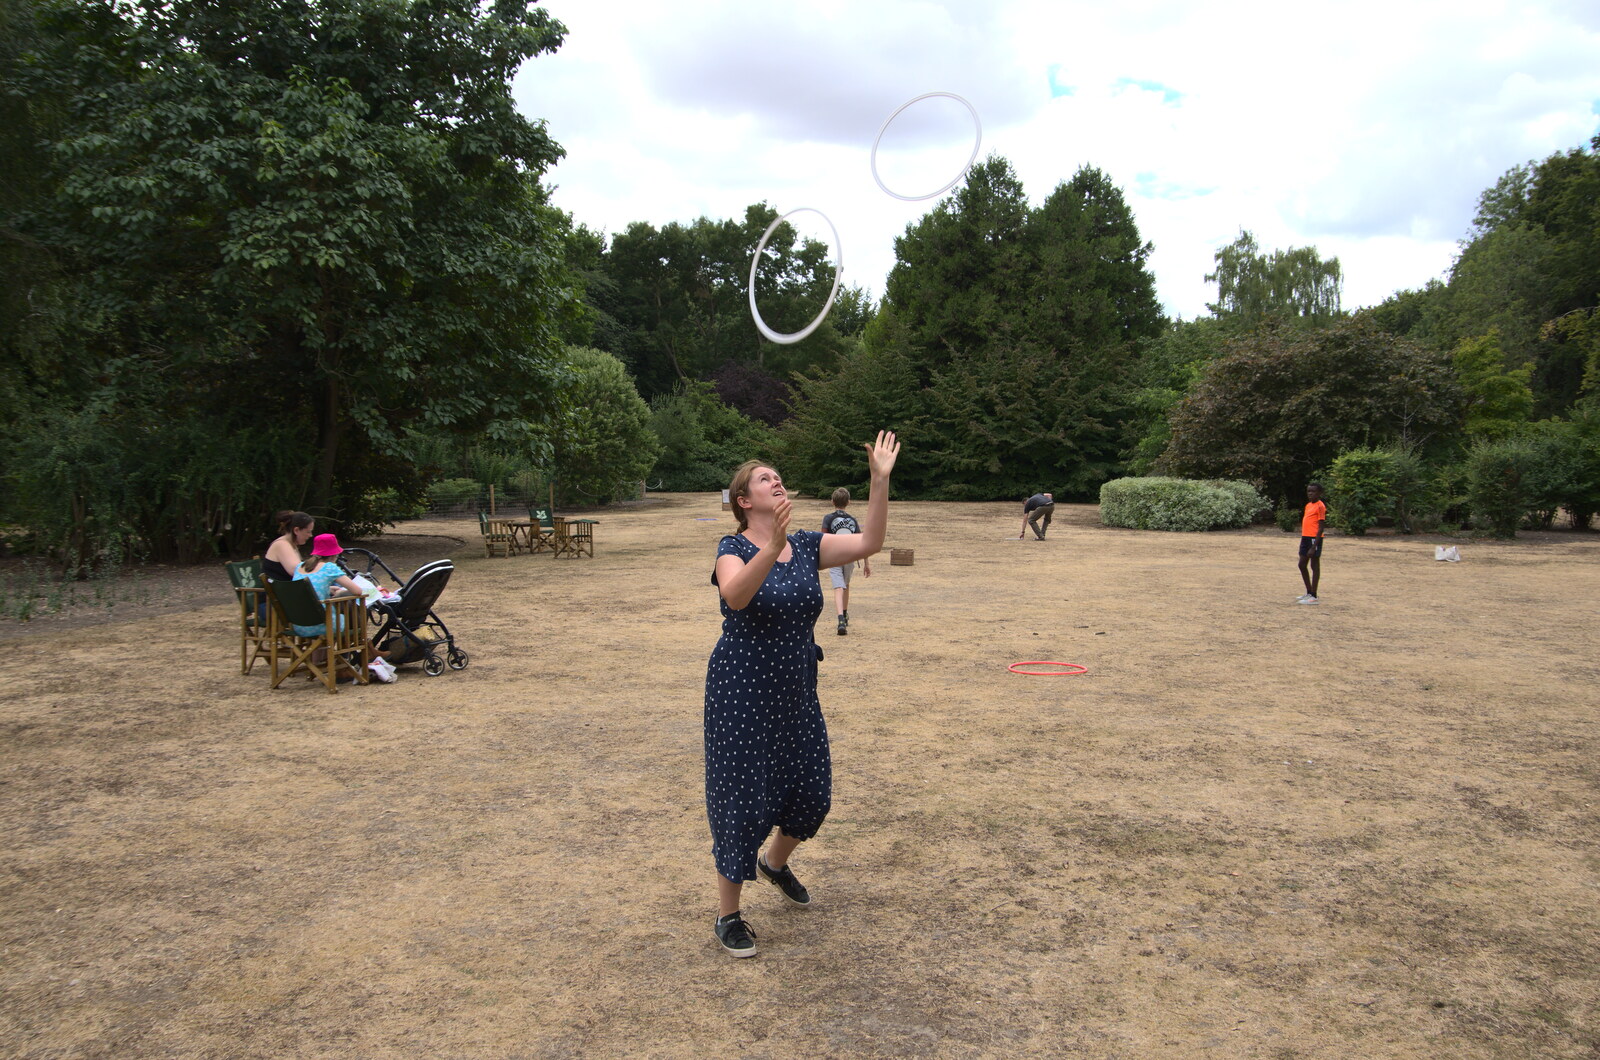 Isobel tries juggling with rings from Anglesey Abbey and a #StandWithUkraine Demo, Cambridge - 24th August 2022